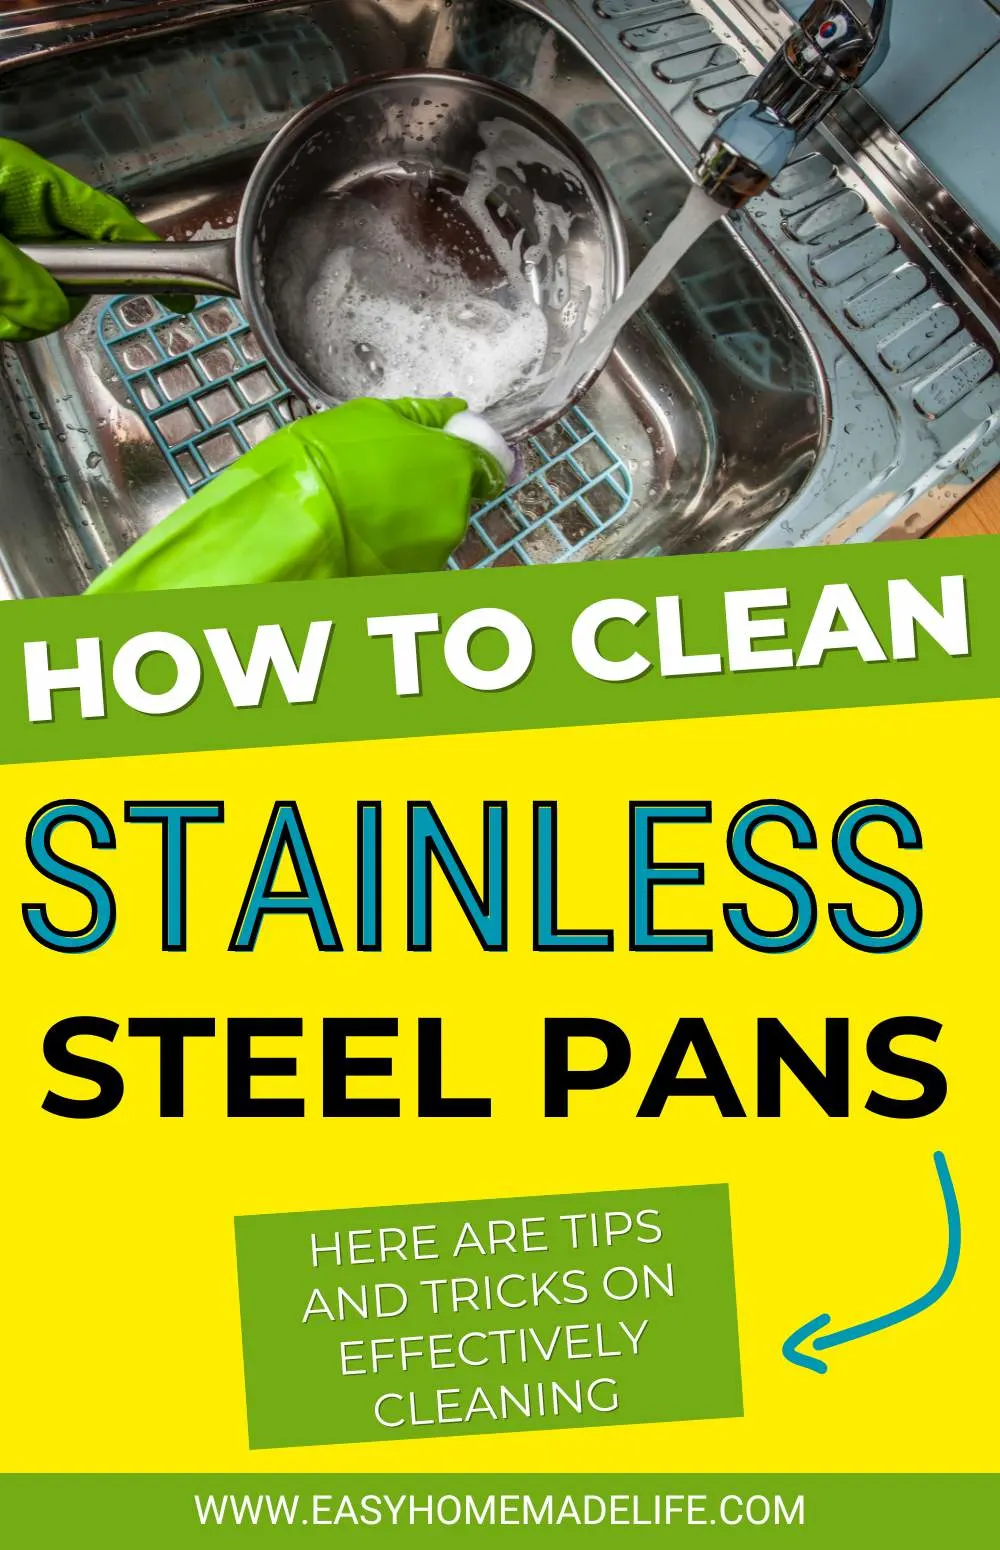 How to clean stainless steel pans.